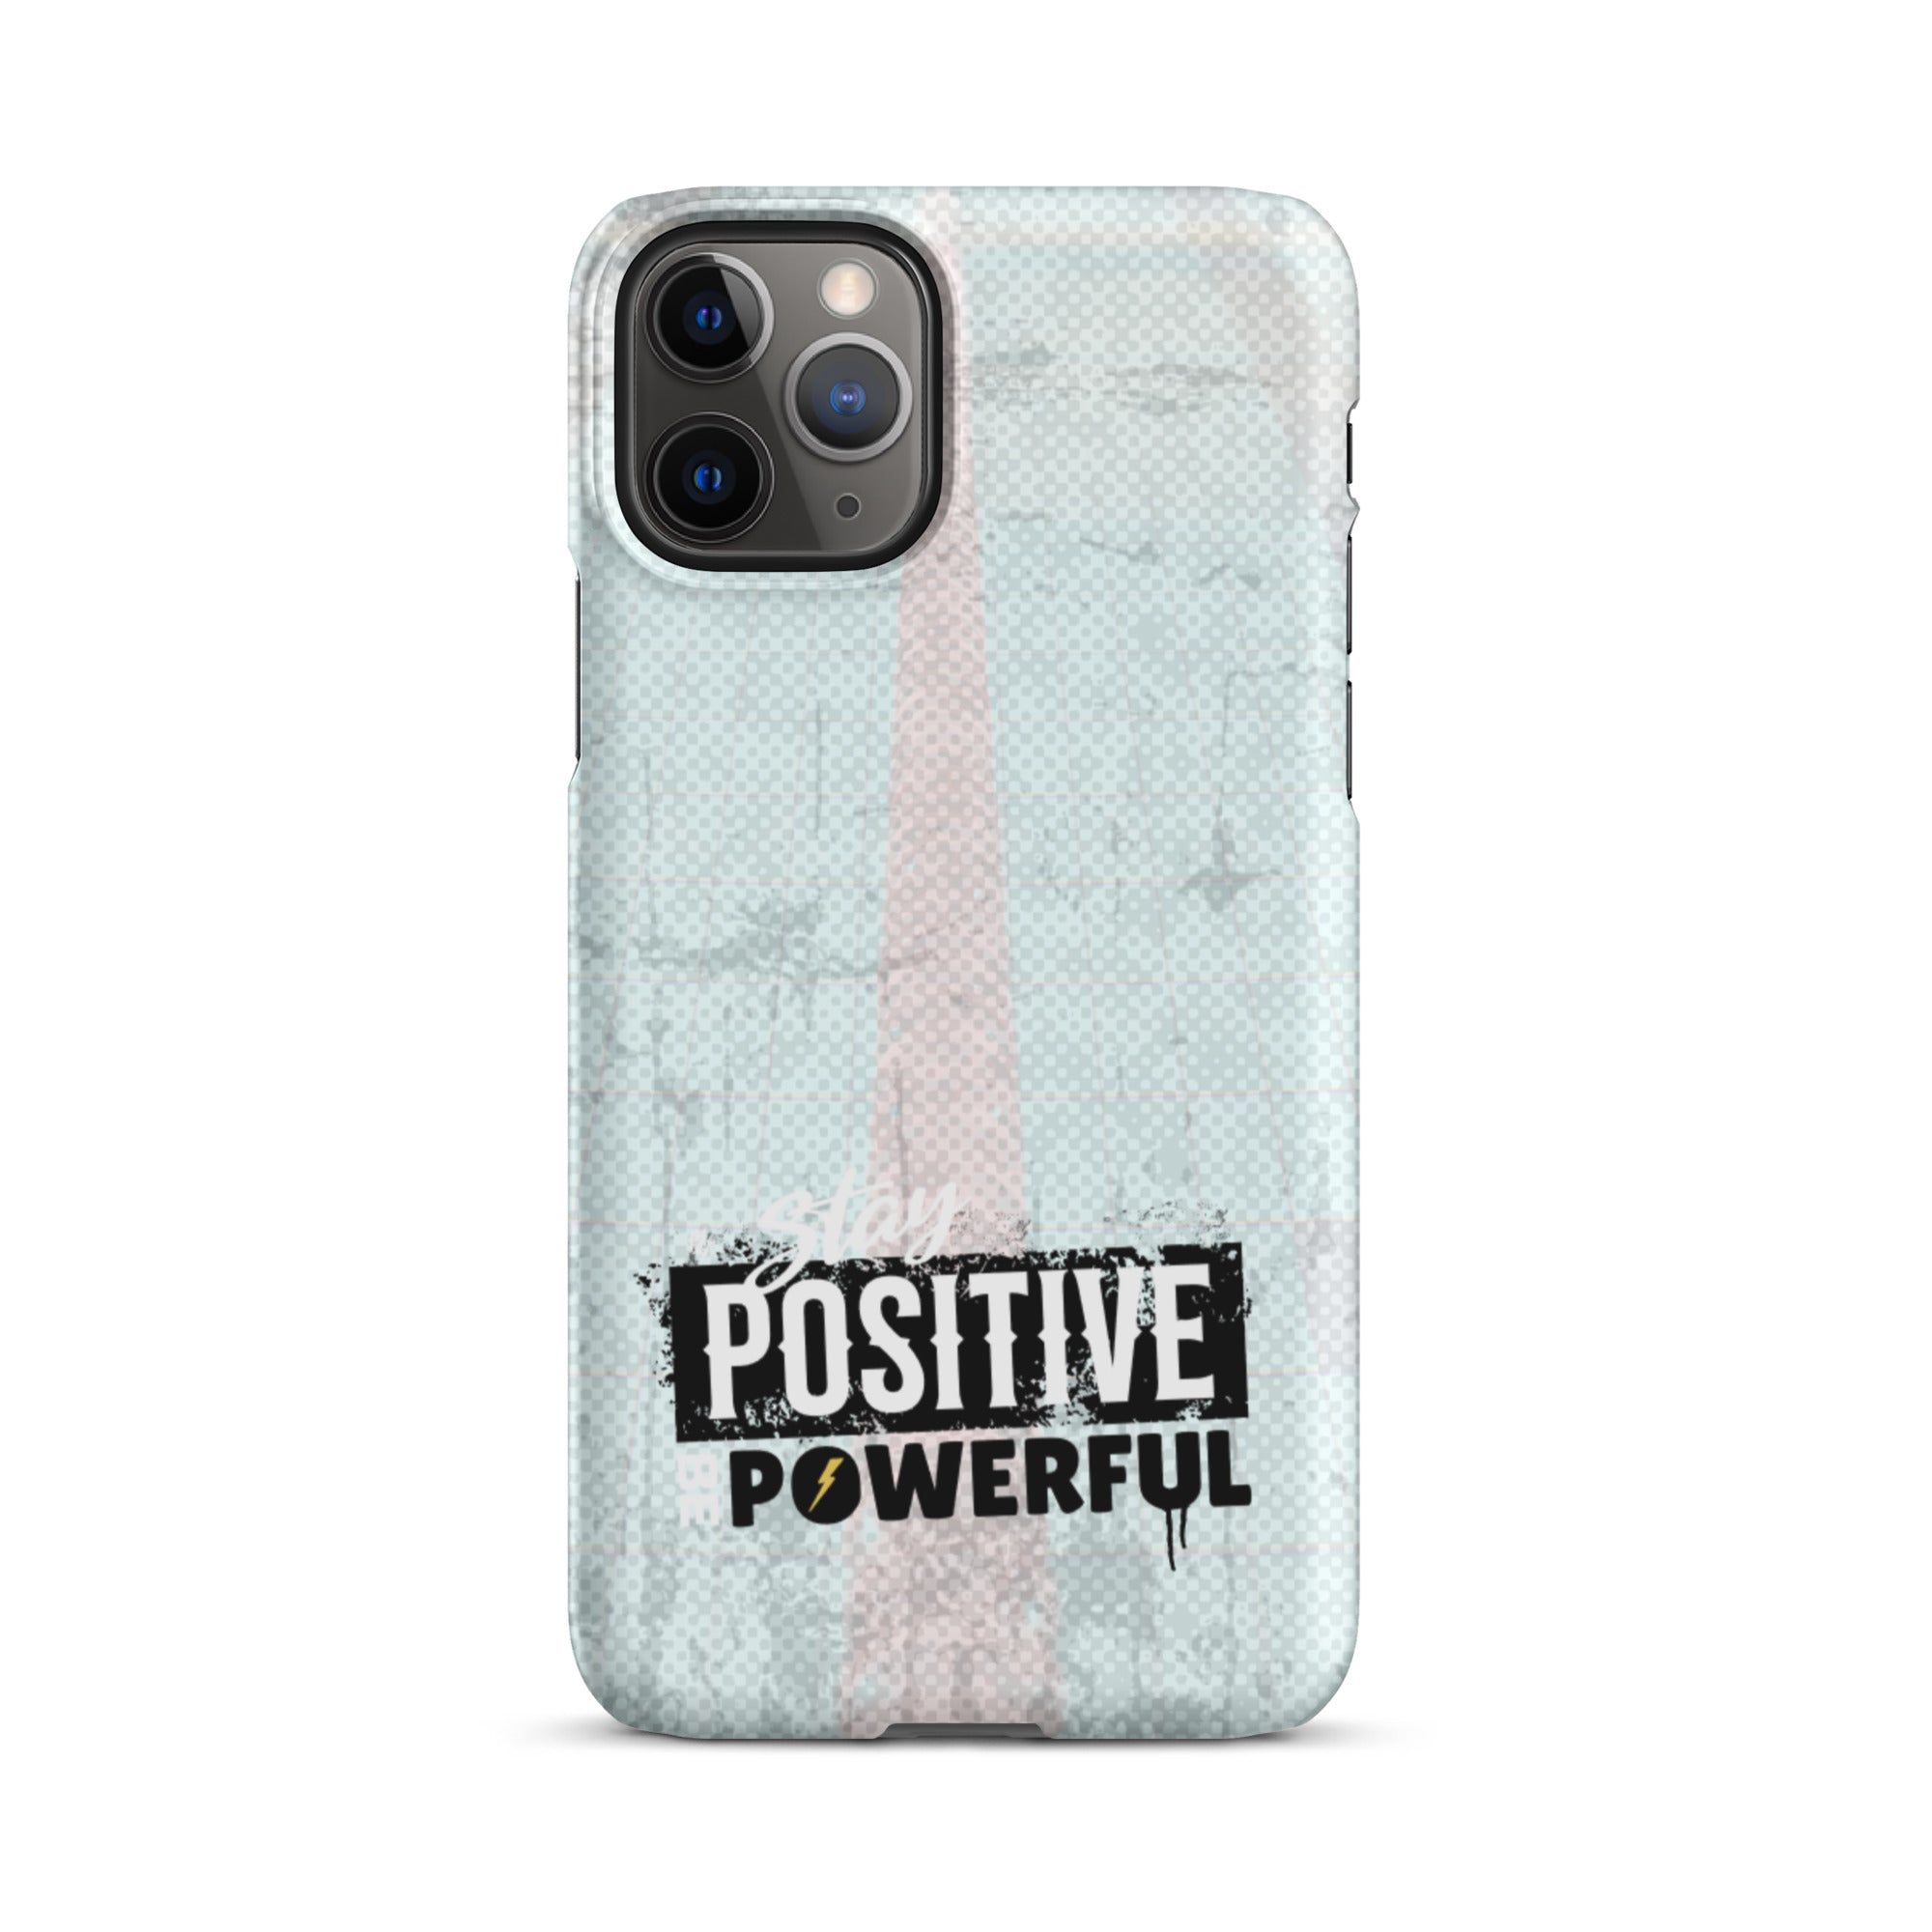 Be Powerful iPhone Case®